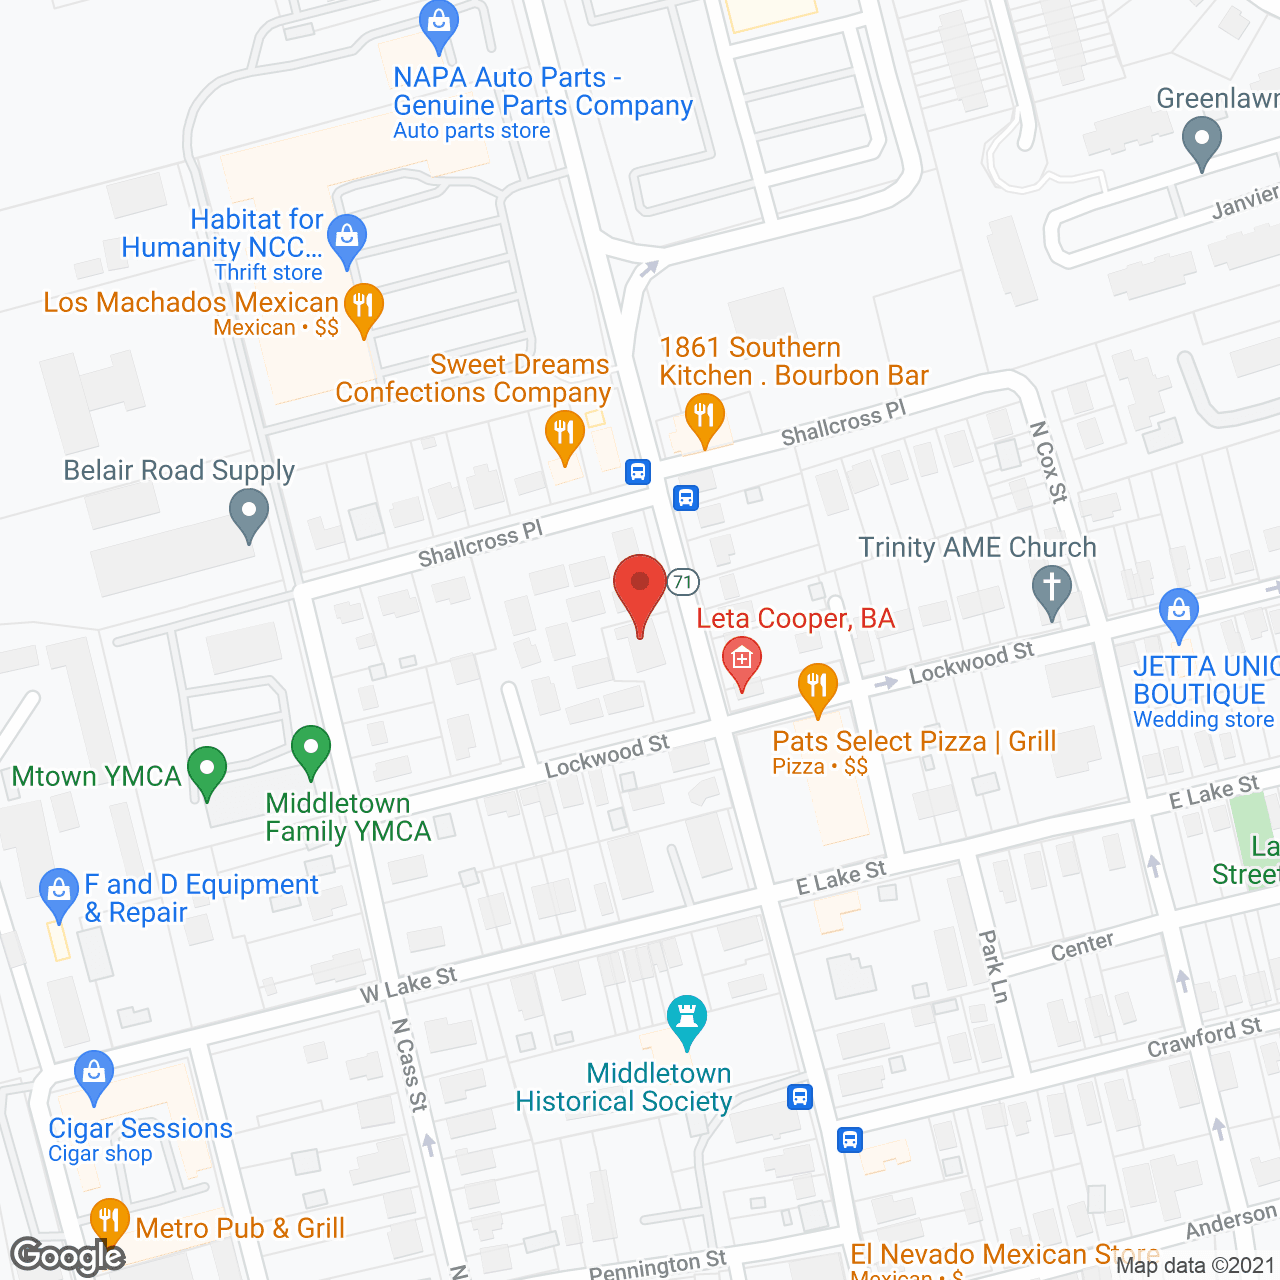 Holly Square in google map